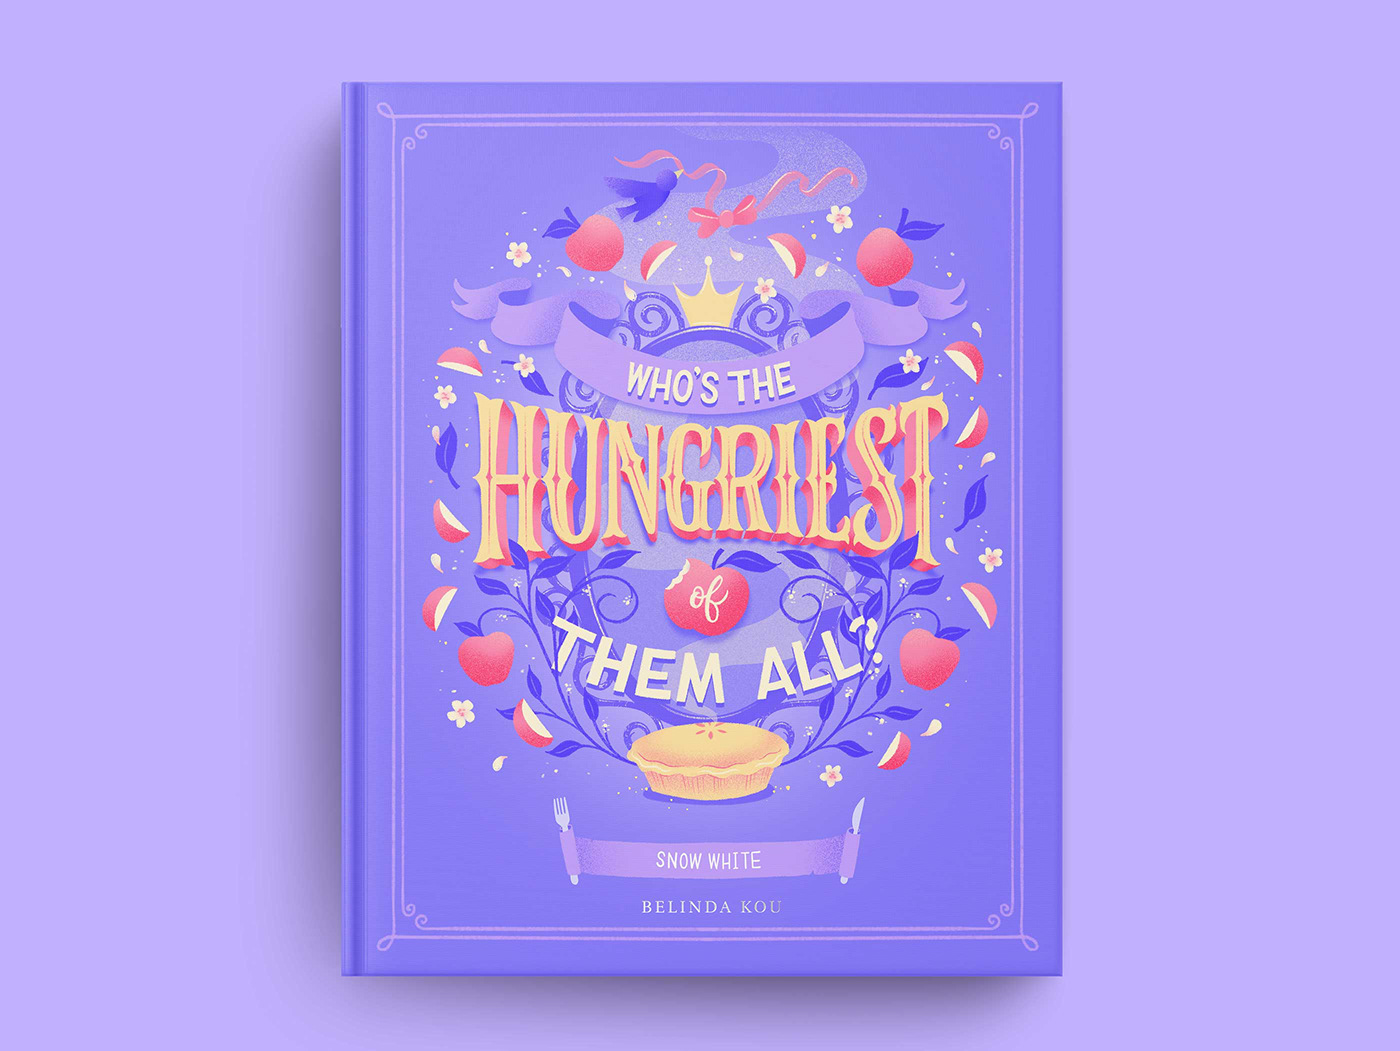 Snow White book cover art featuring hand lettering and illustrations of fairy tale and food art